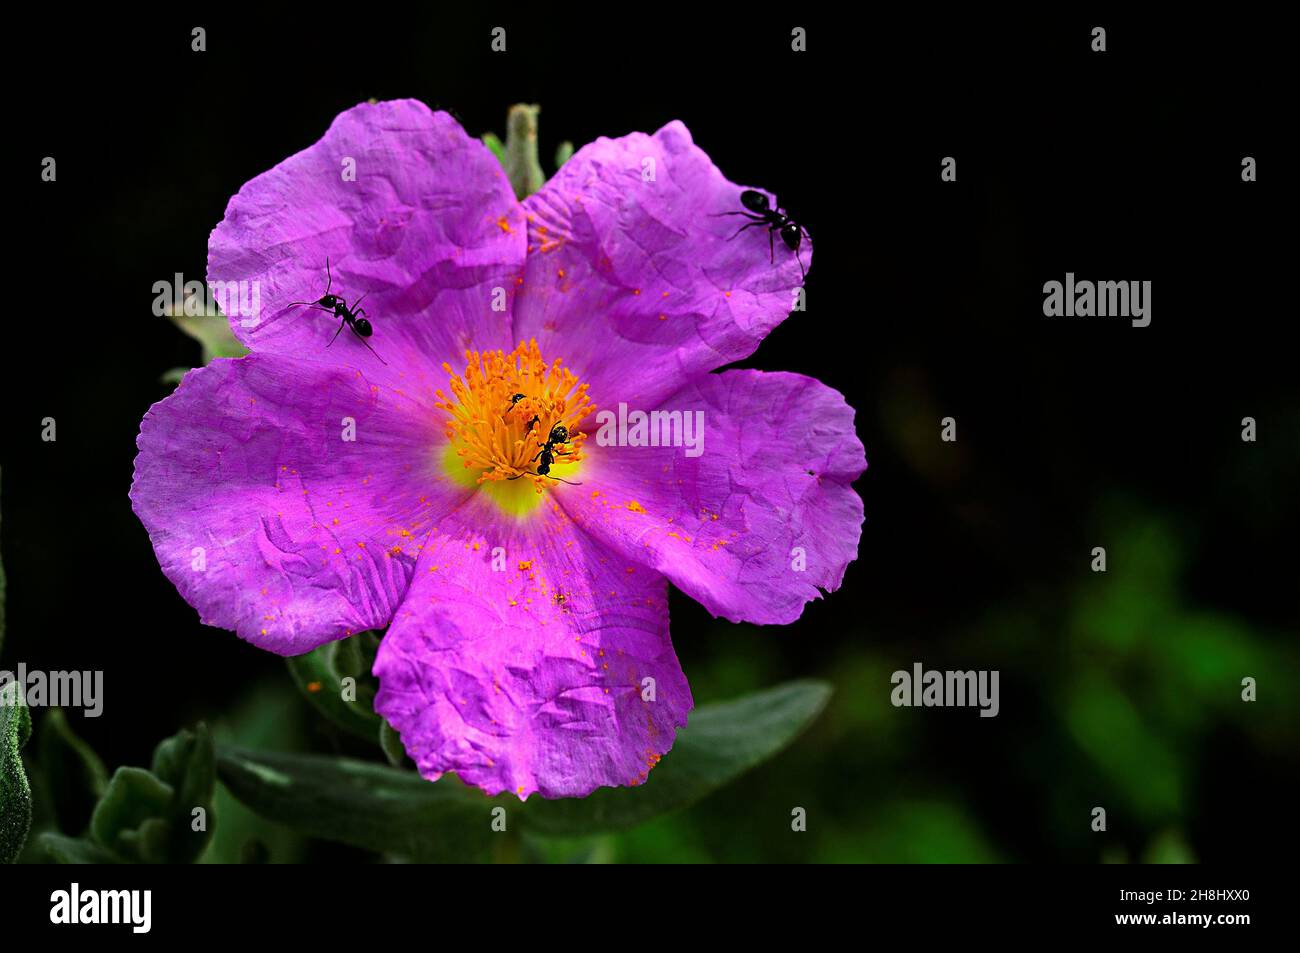 Cistus creticus is a species of shrub belonging to the Cistaceae family. Purple flower. Stock Photo